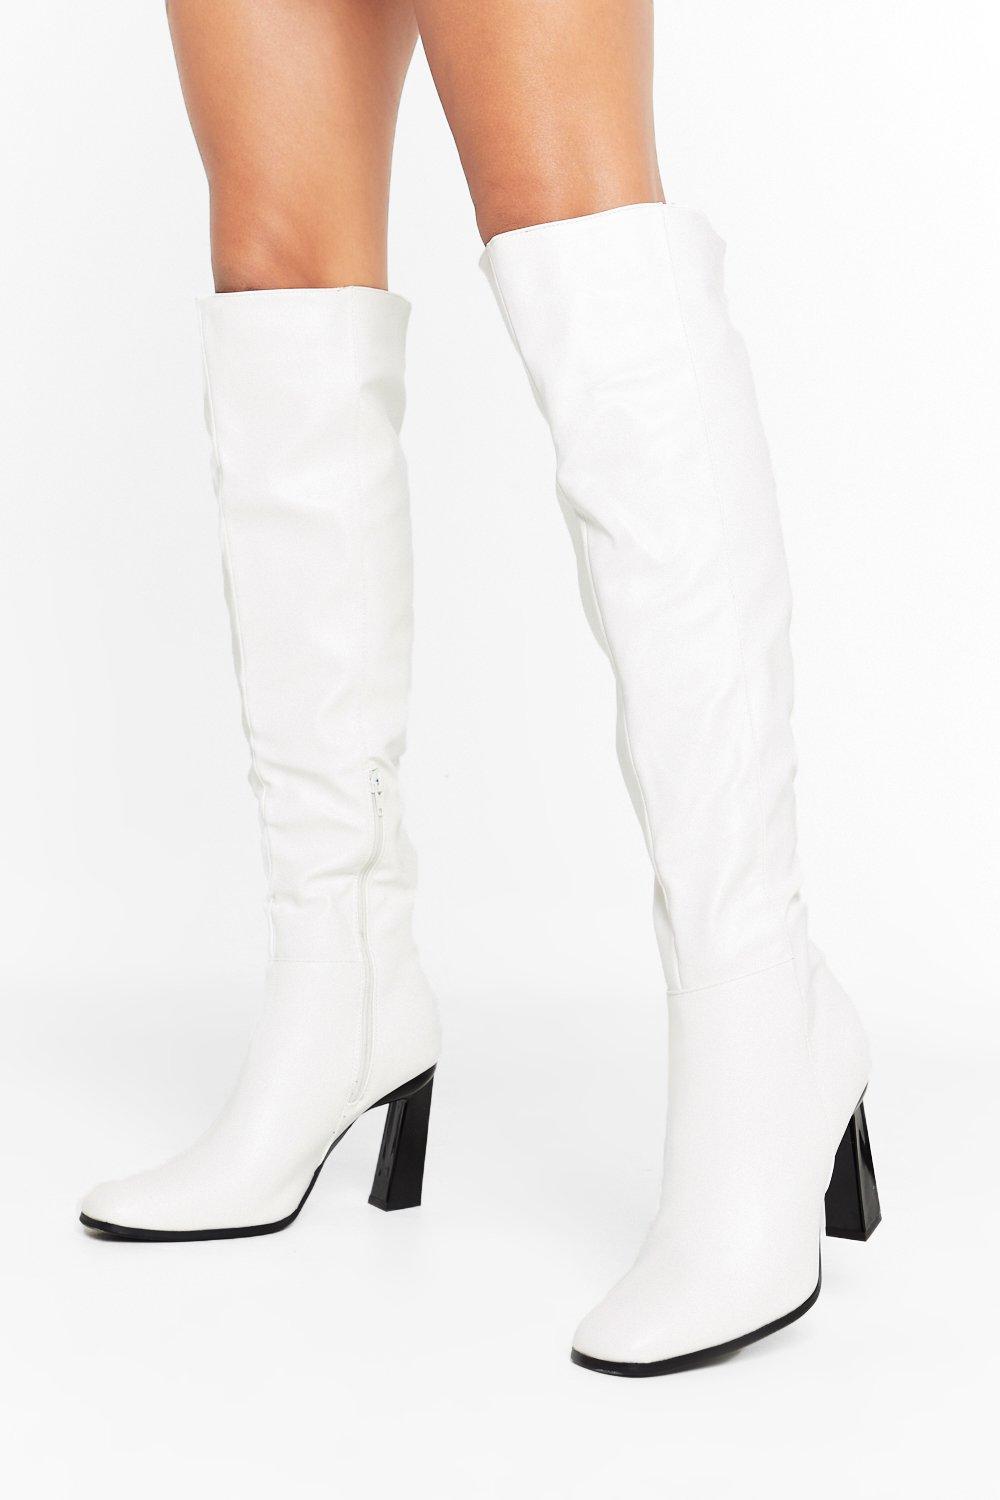 high white boots